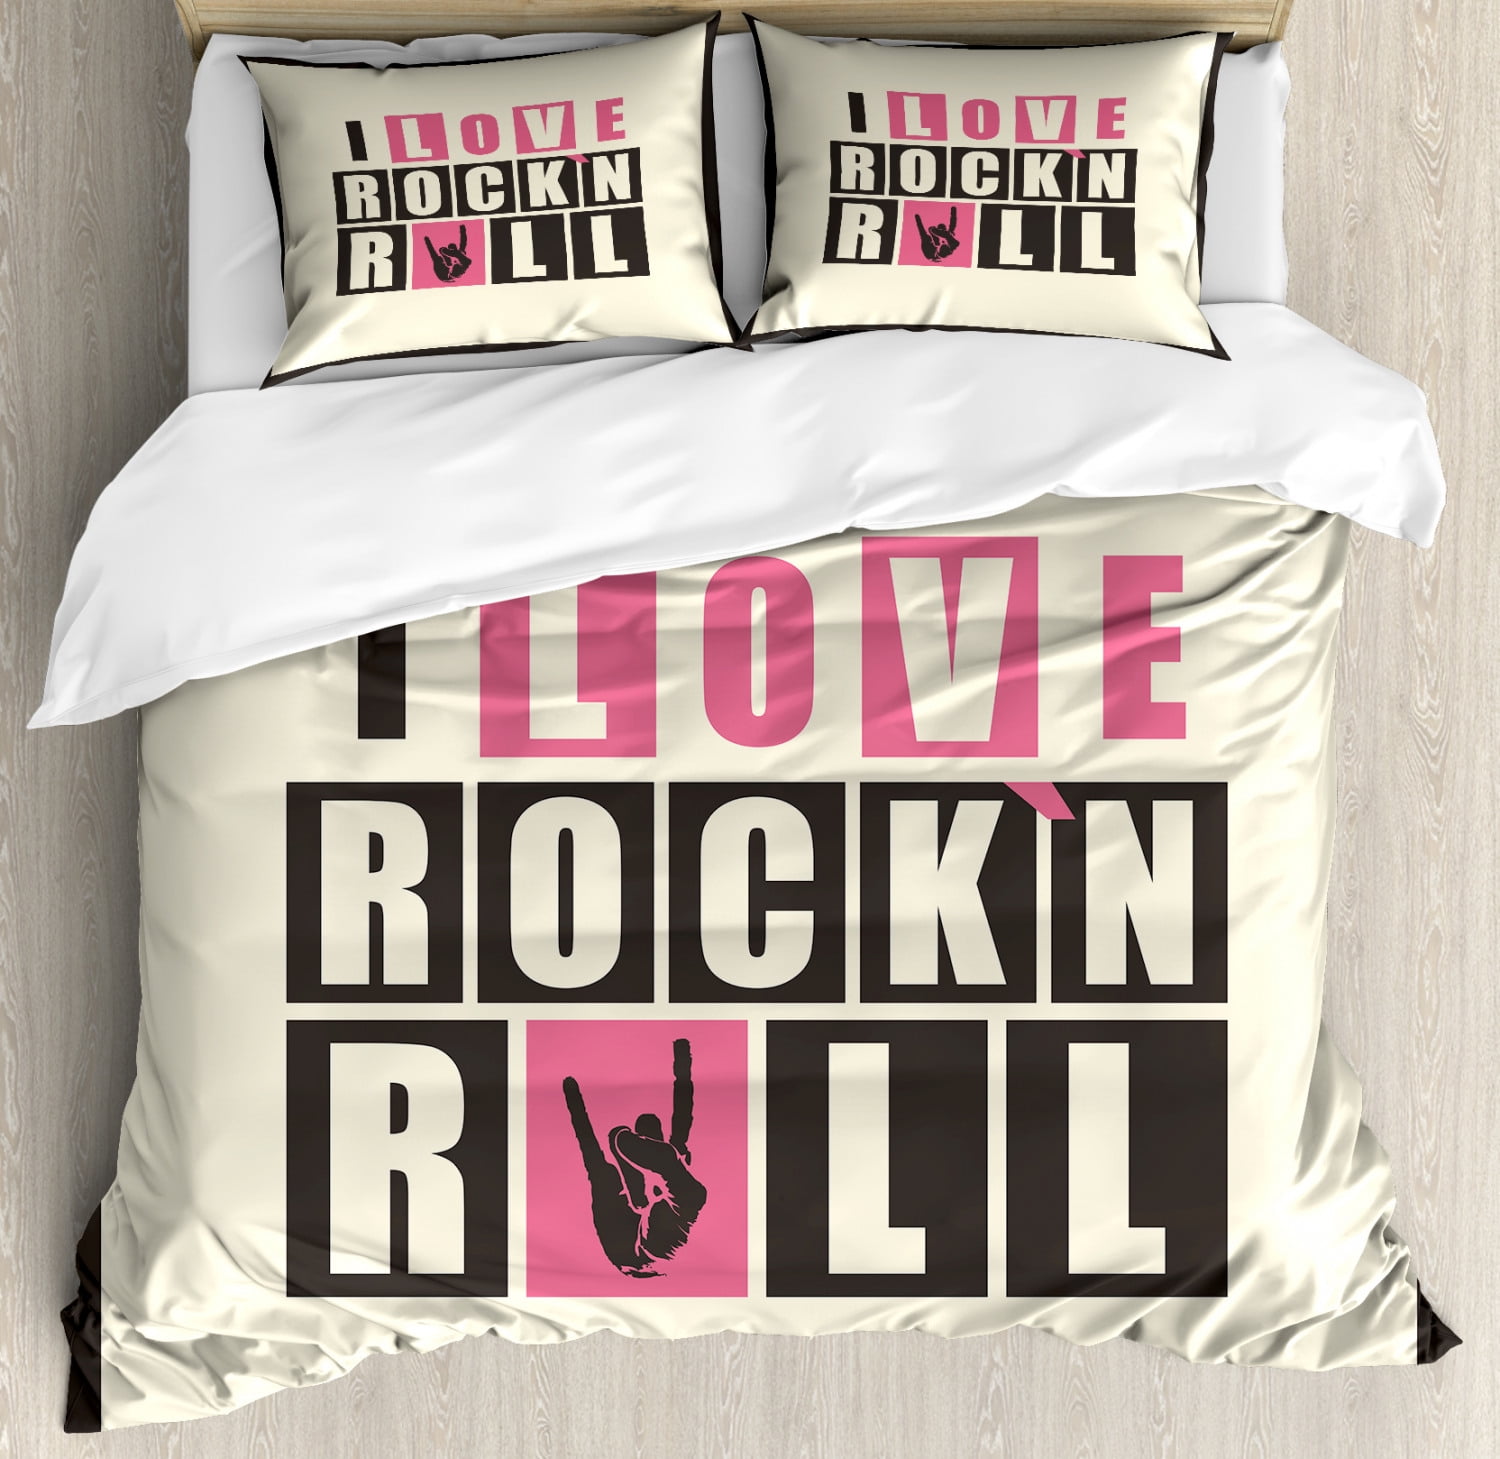 Rock Music Duvet Cover Set Twin Queen King Sizes with Pillow Shams Bedding Decor 